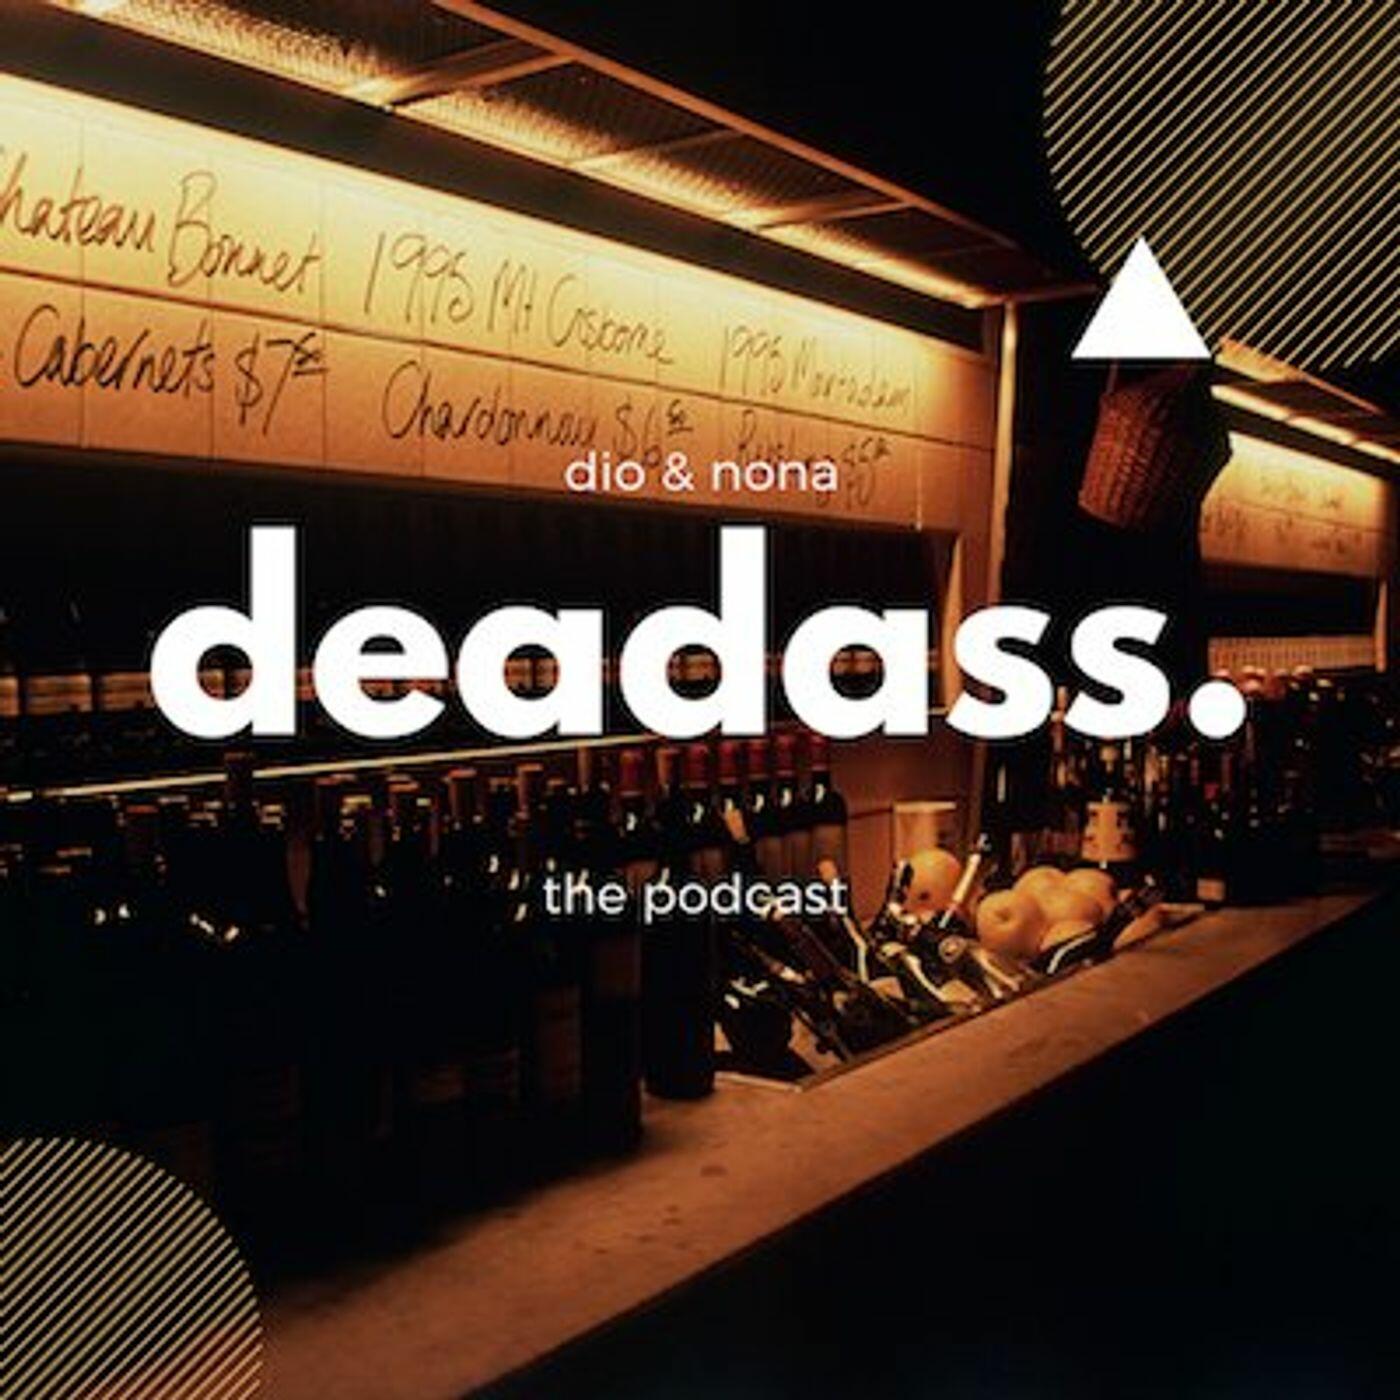 Listen Free to deadass. the podcast. on iHeartRadio Podcasts iHeartRadio